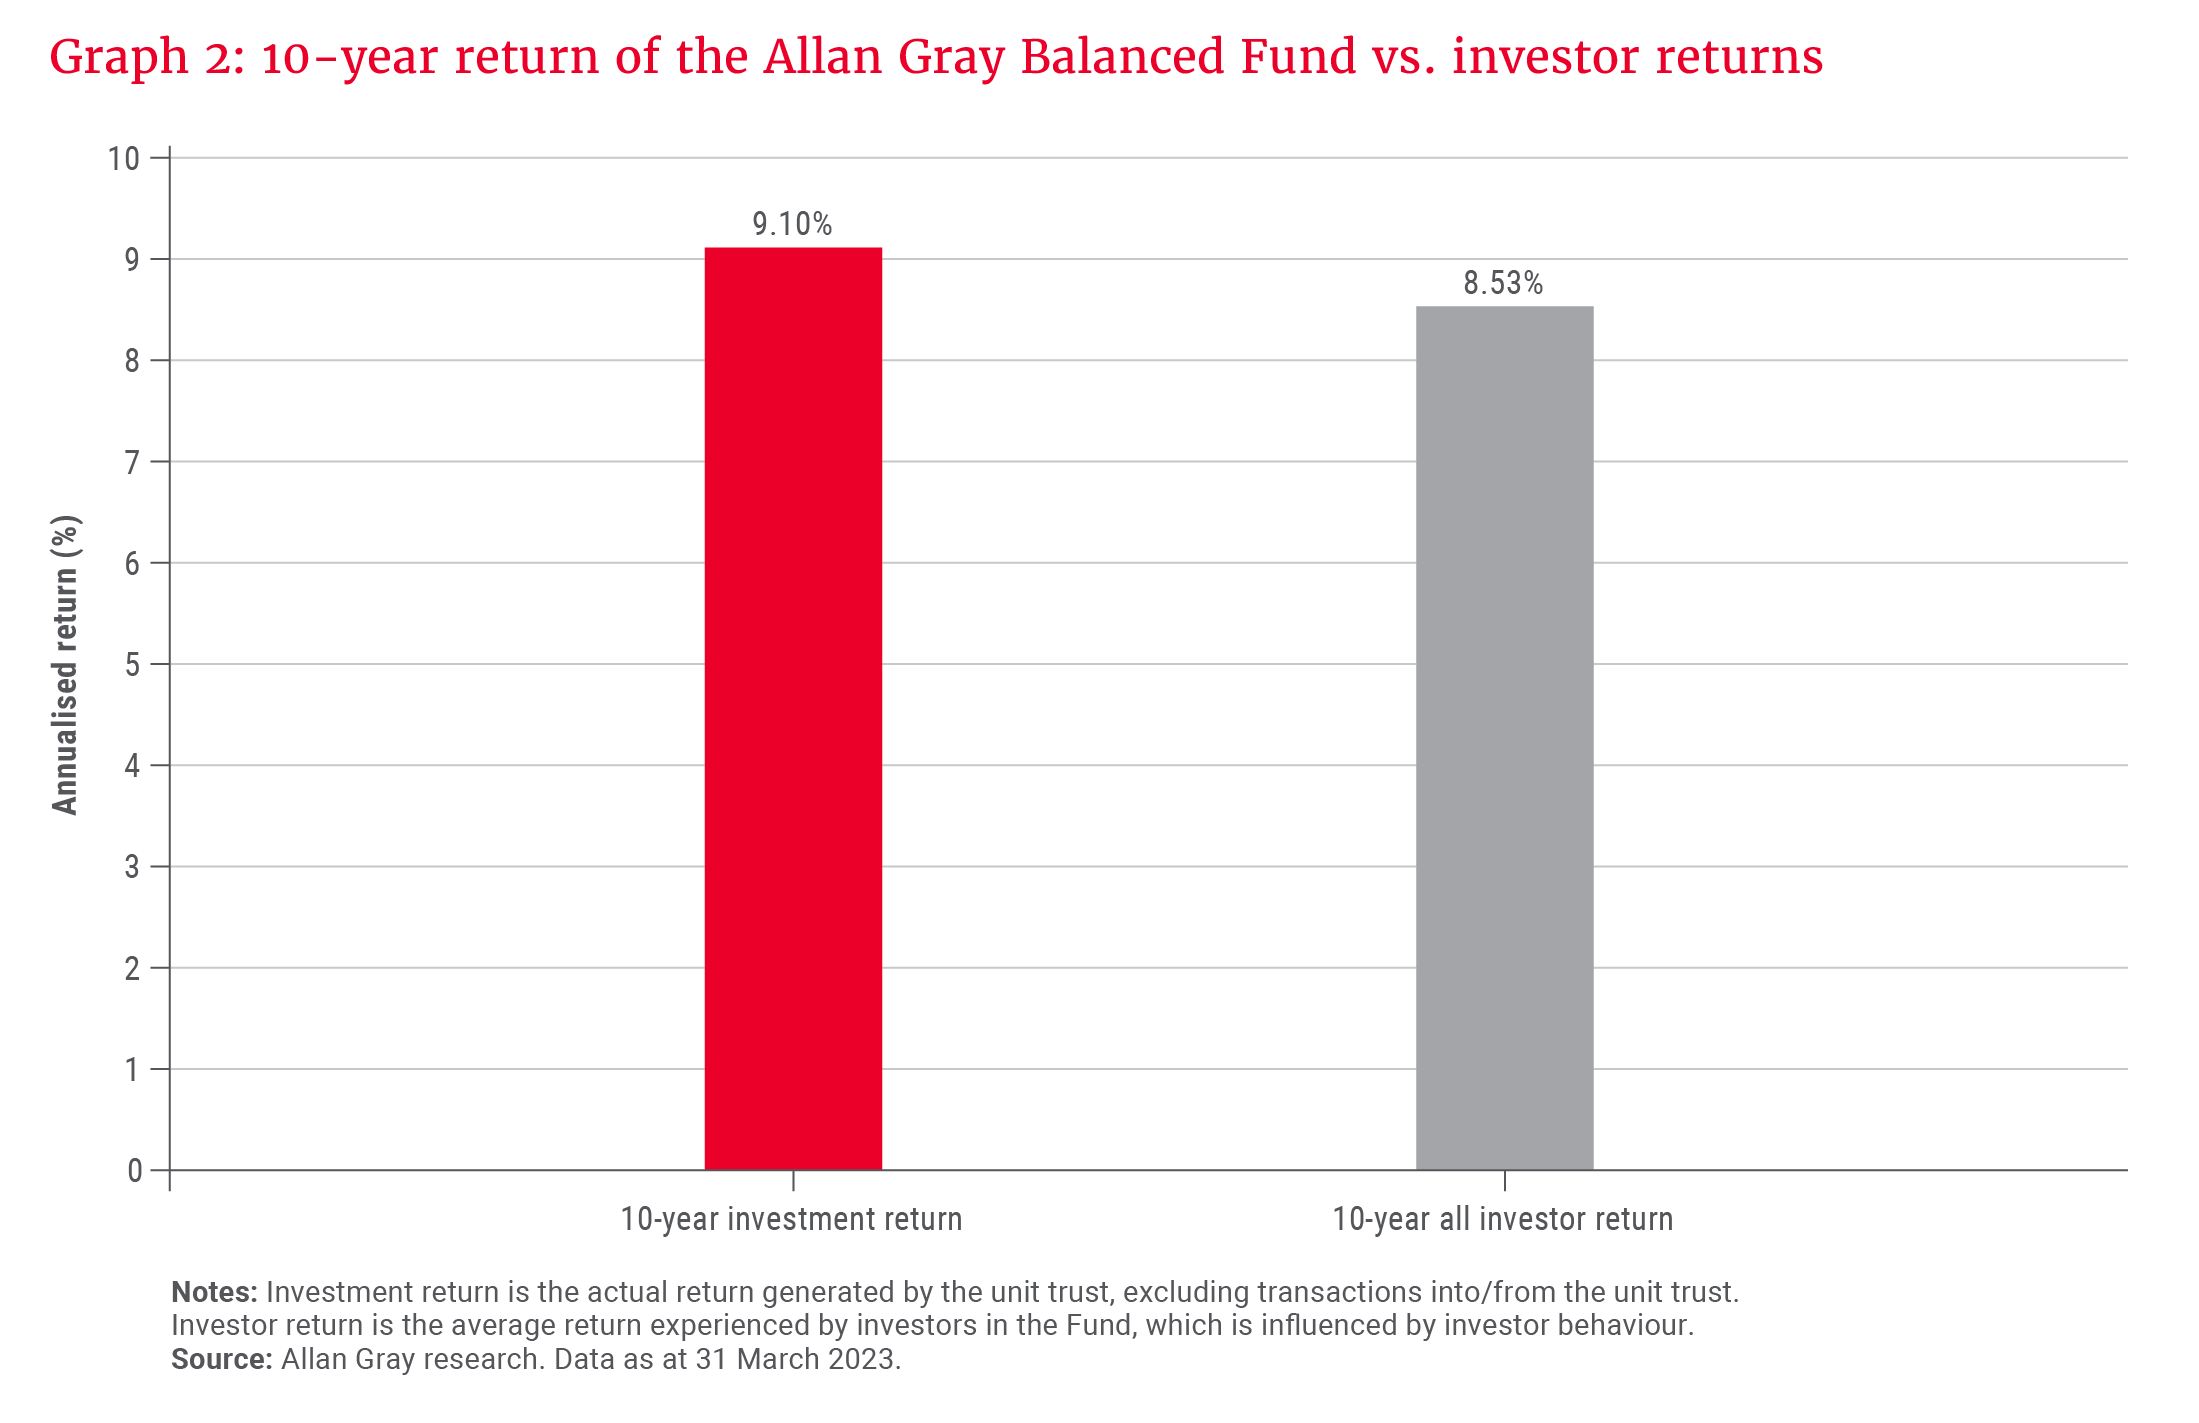 Graph 2_10-year return of the AGBF vs. investor returns